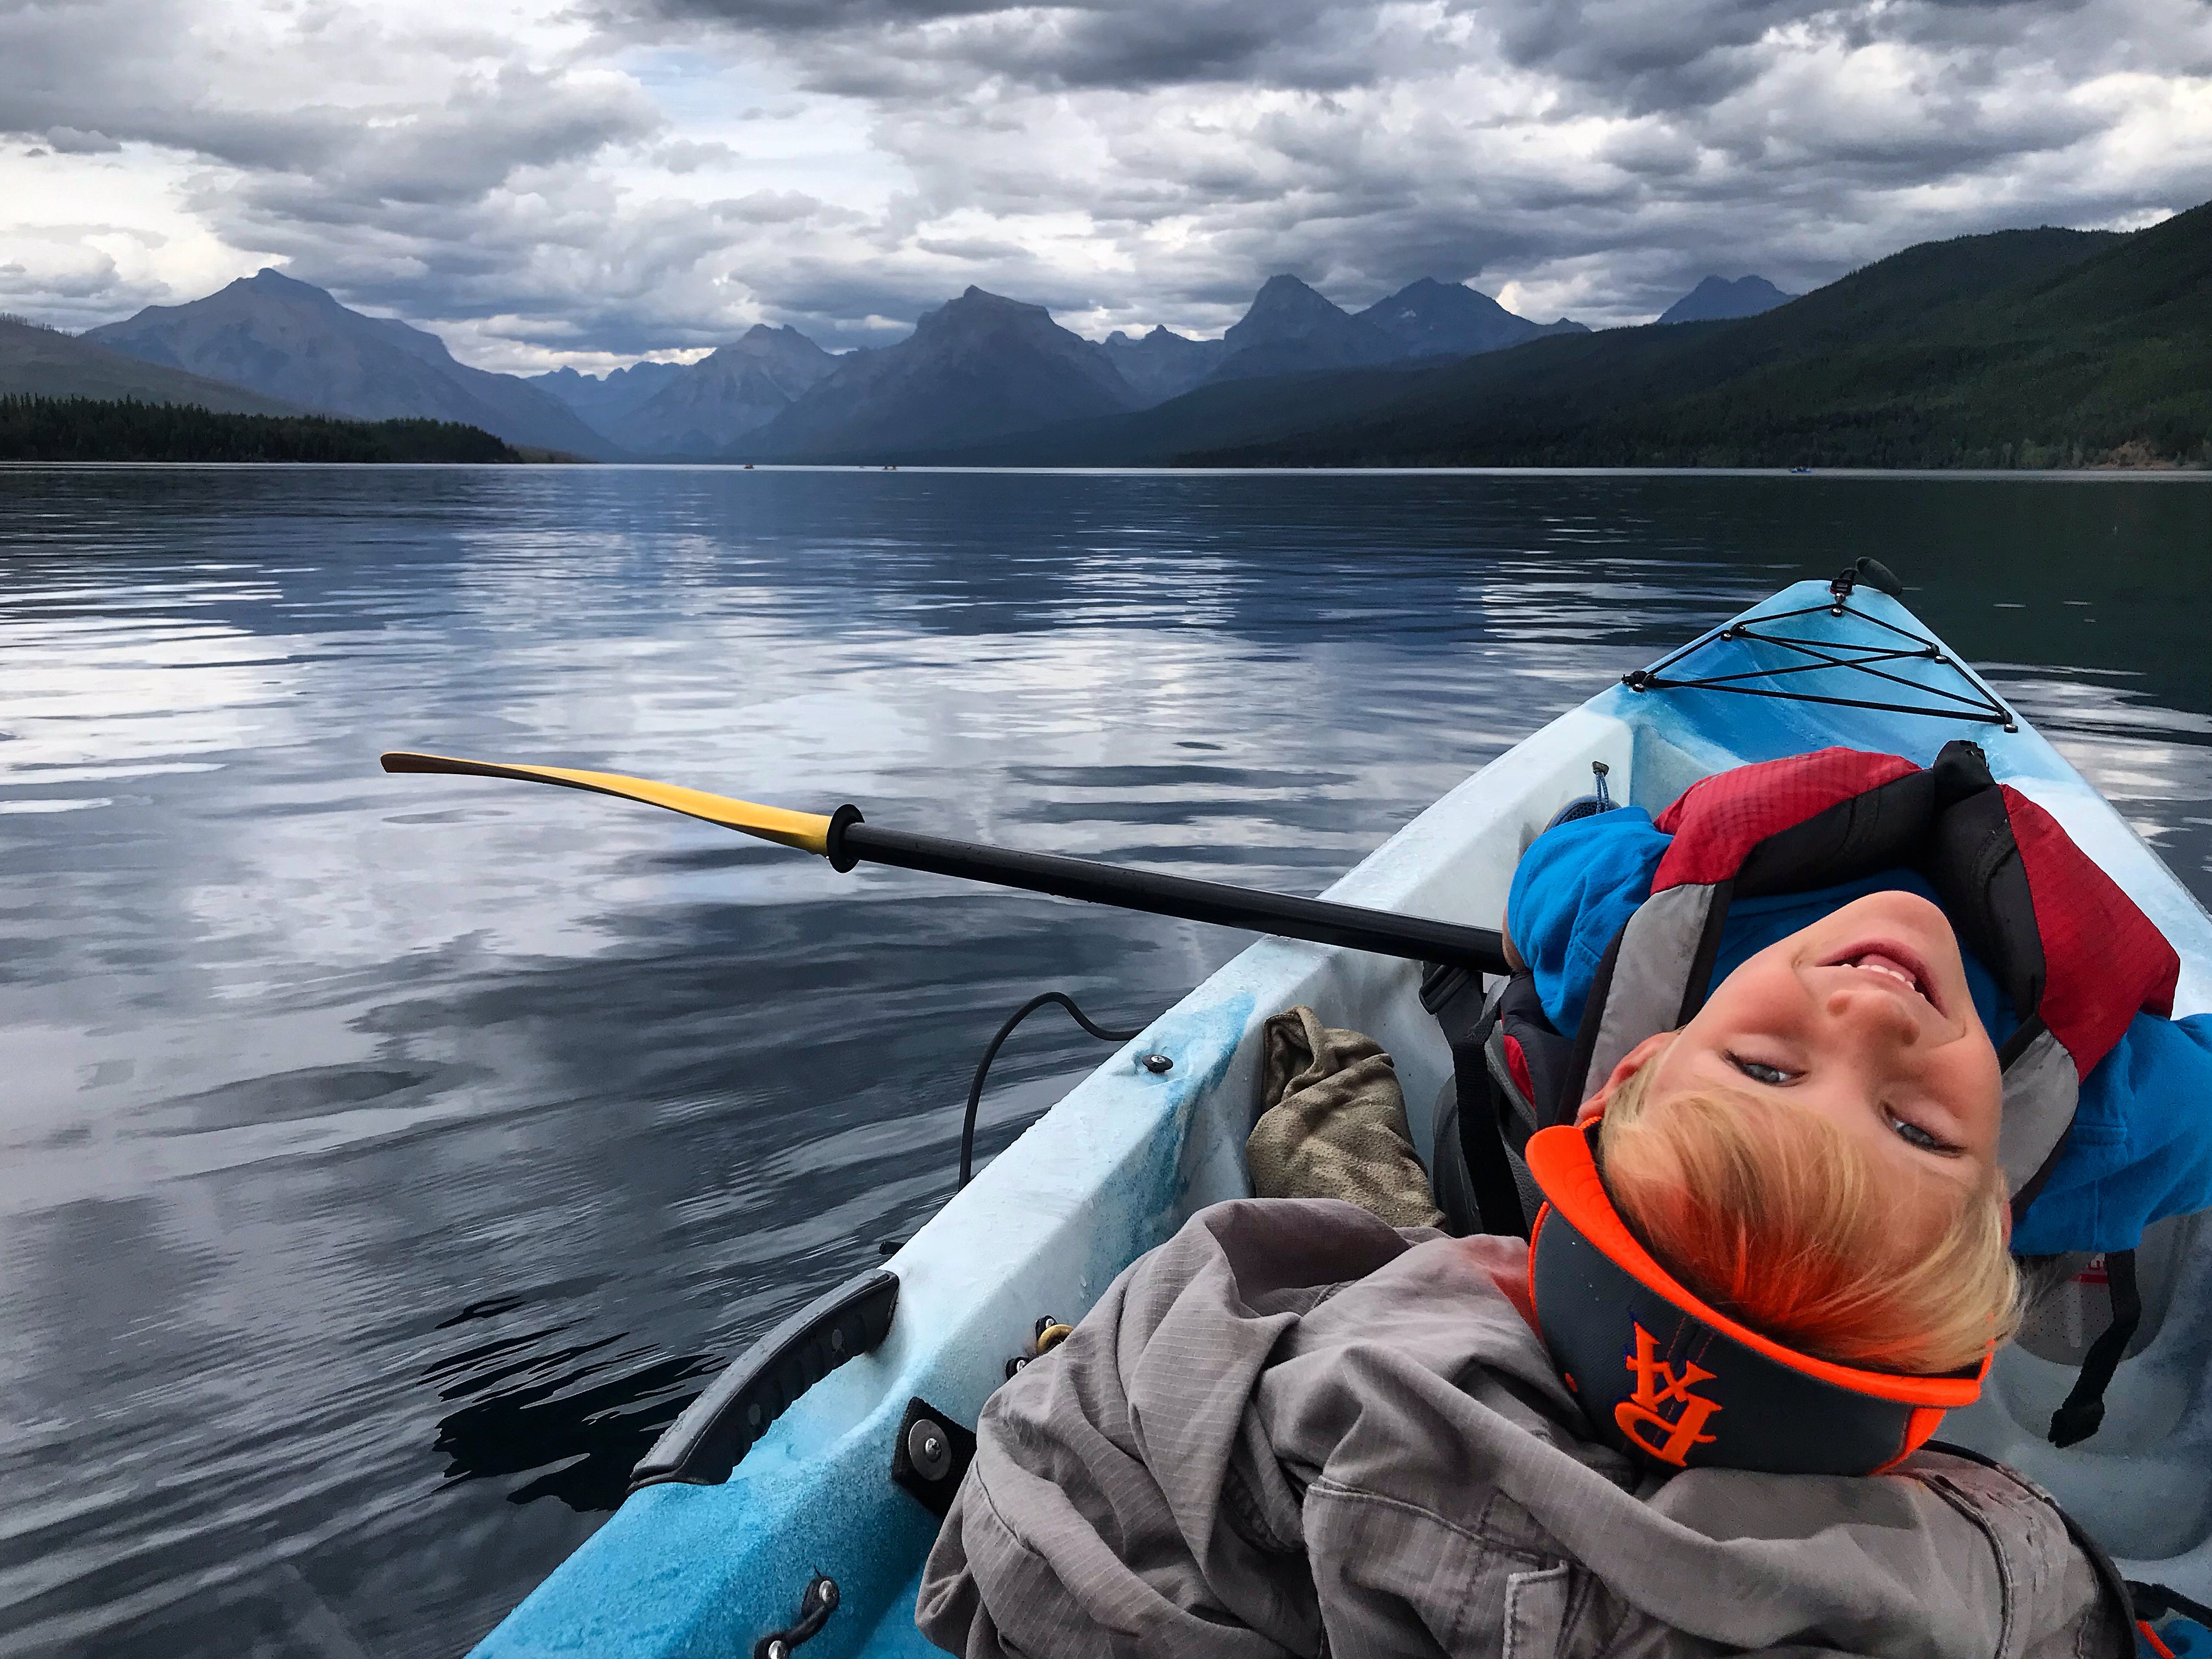 Boy in a canoe on a cloudy day